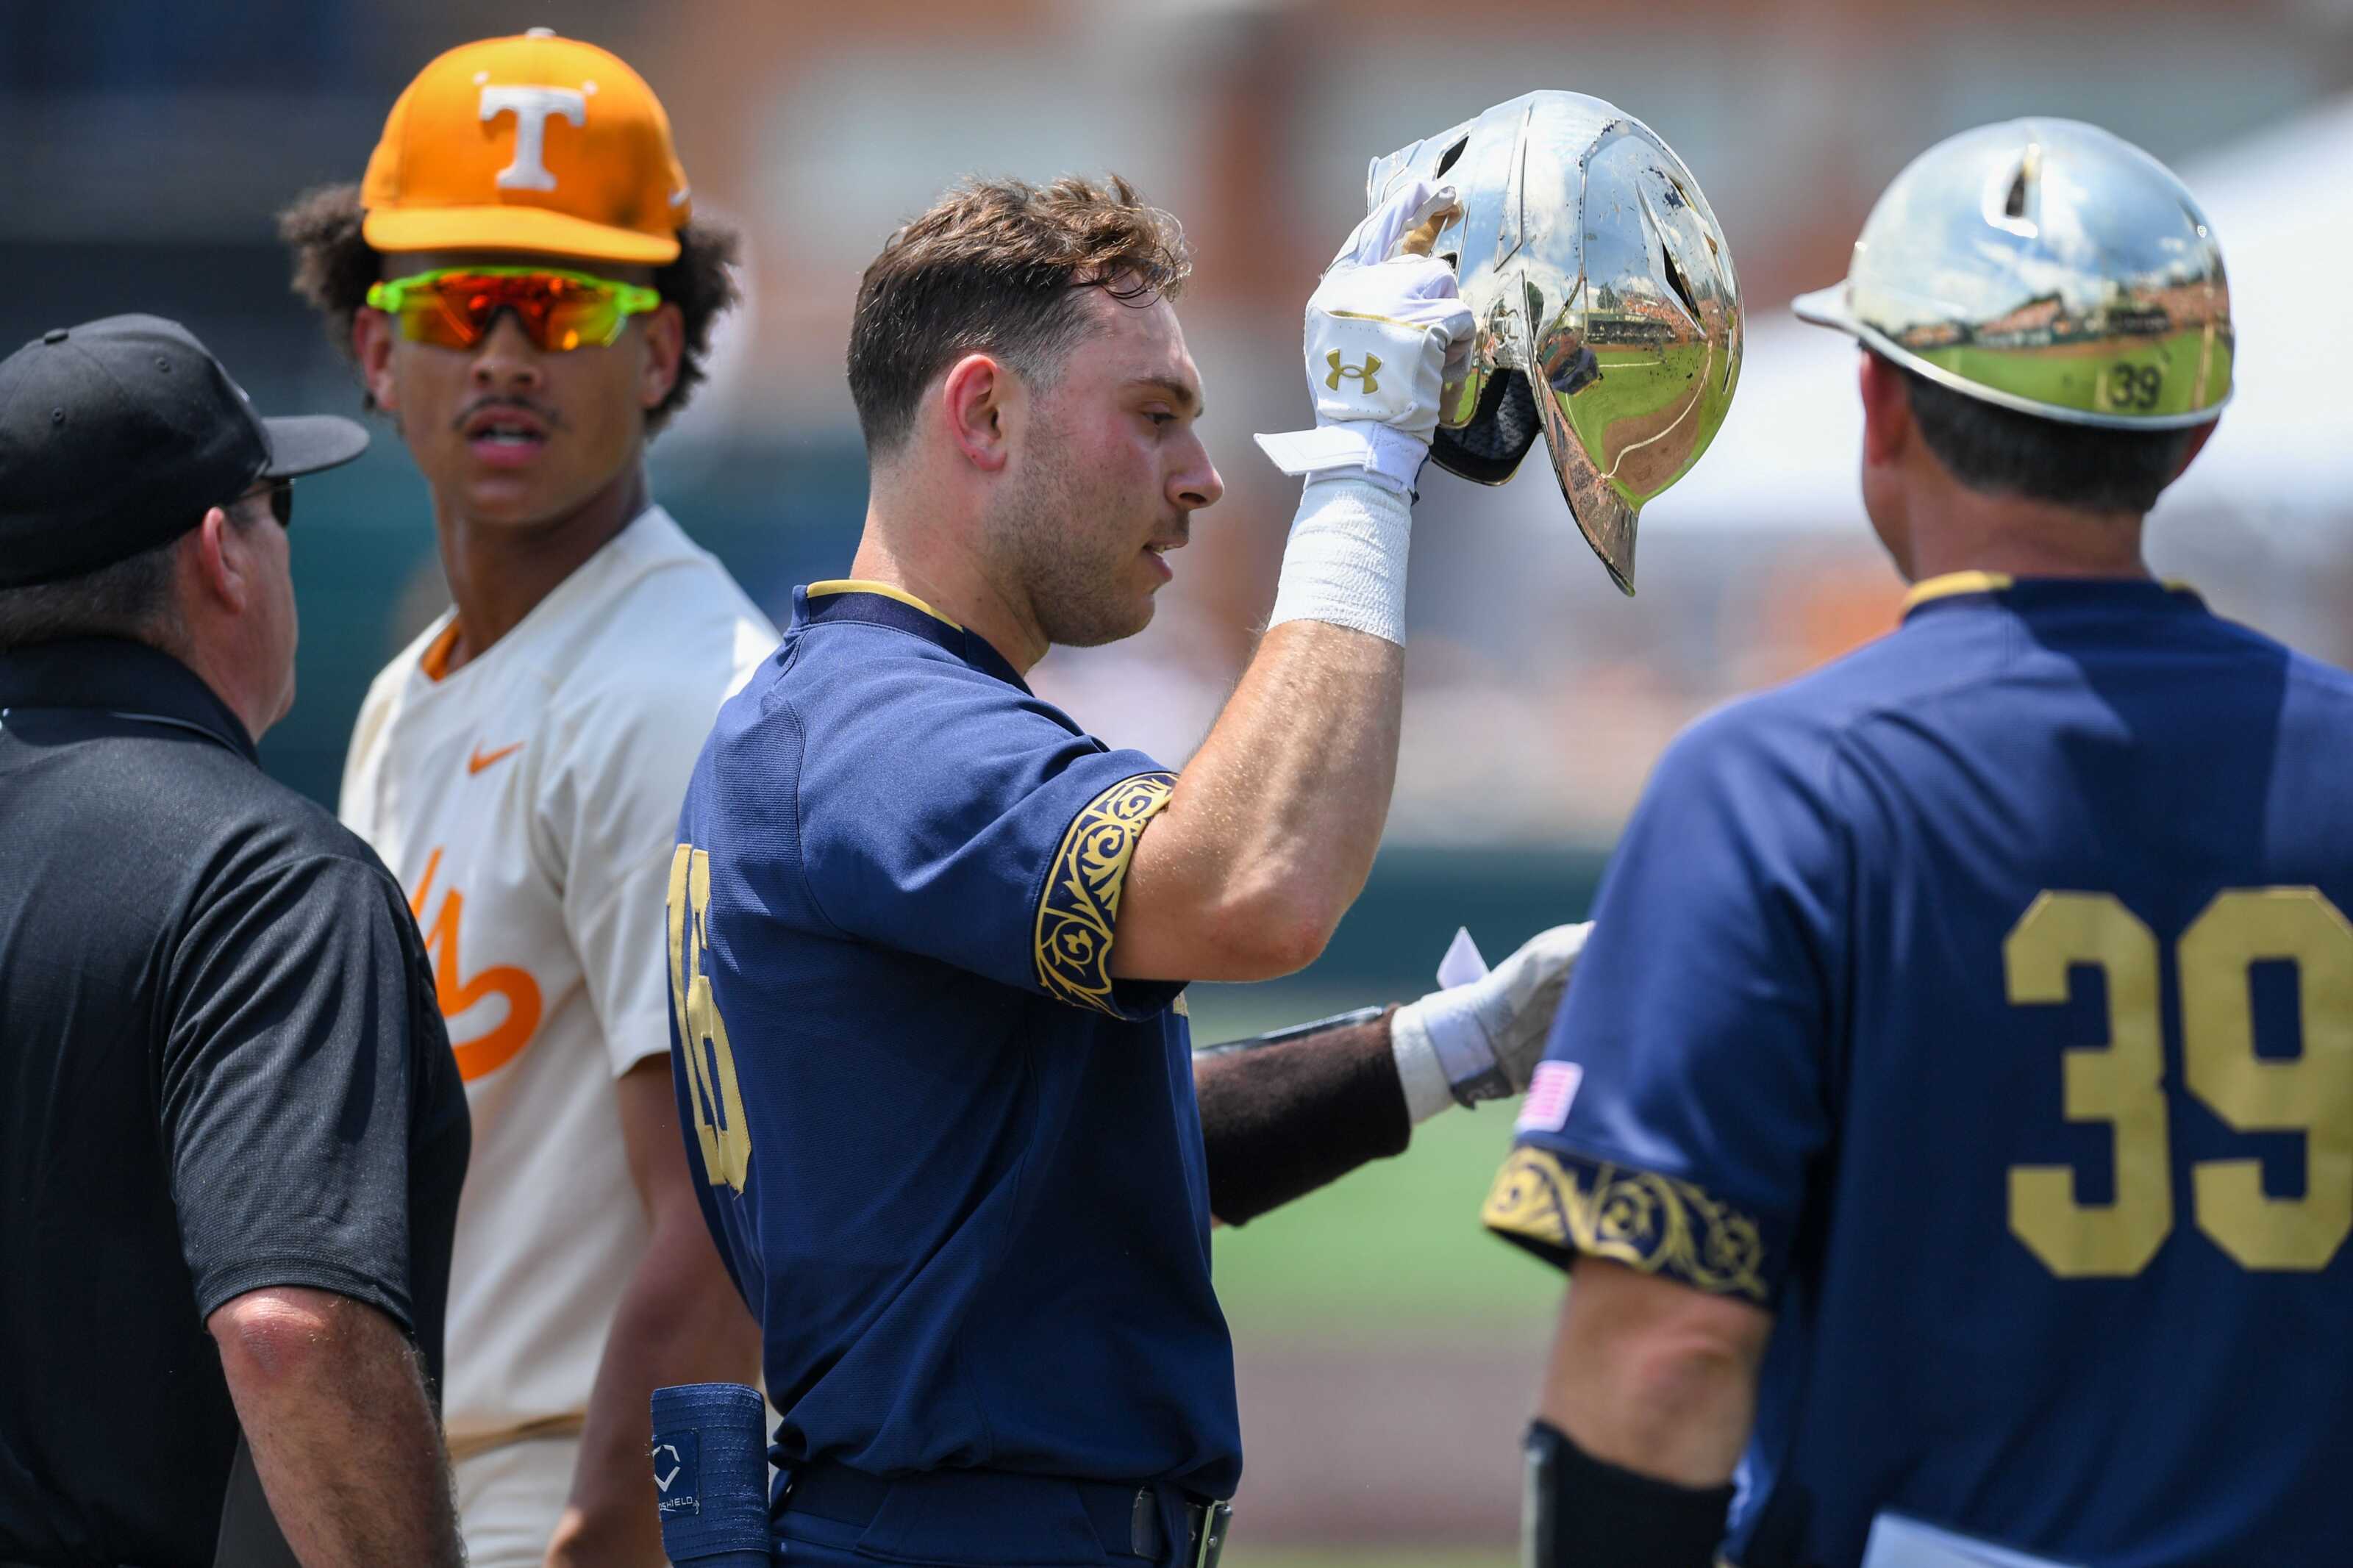 One game will send either Notre or Tennessee to College World Series